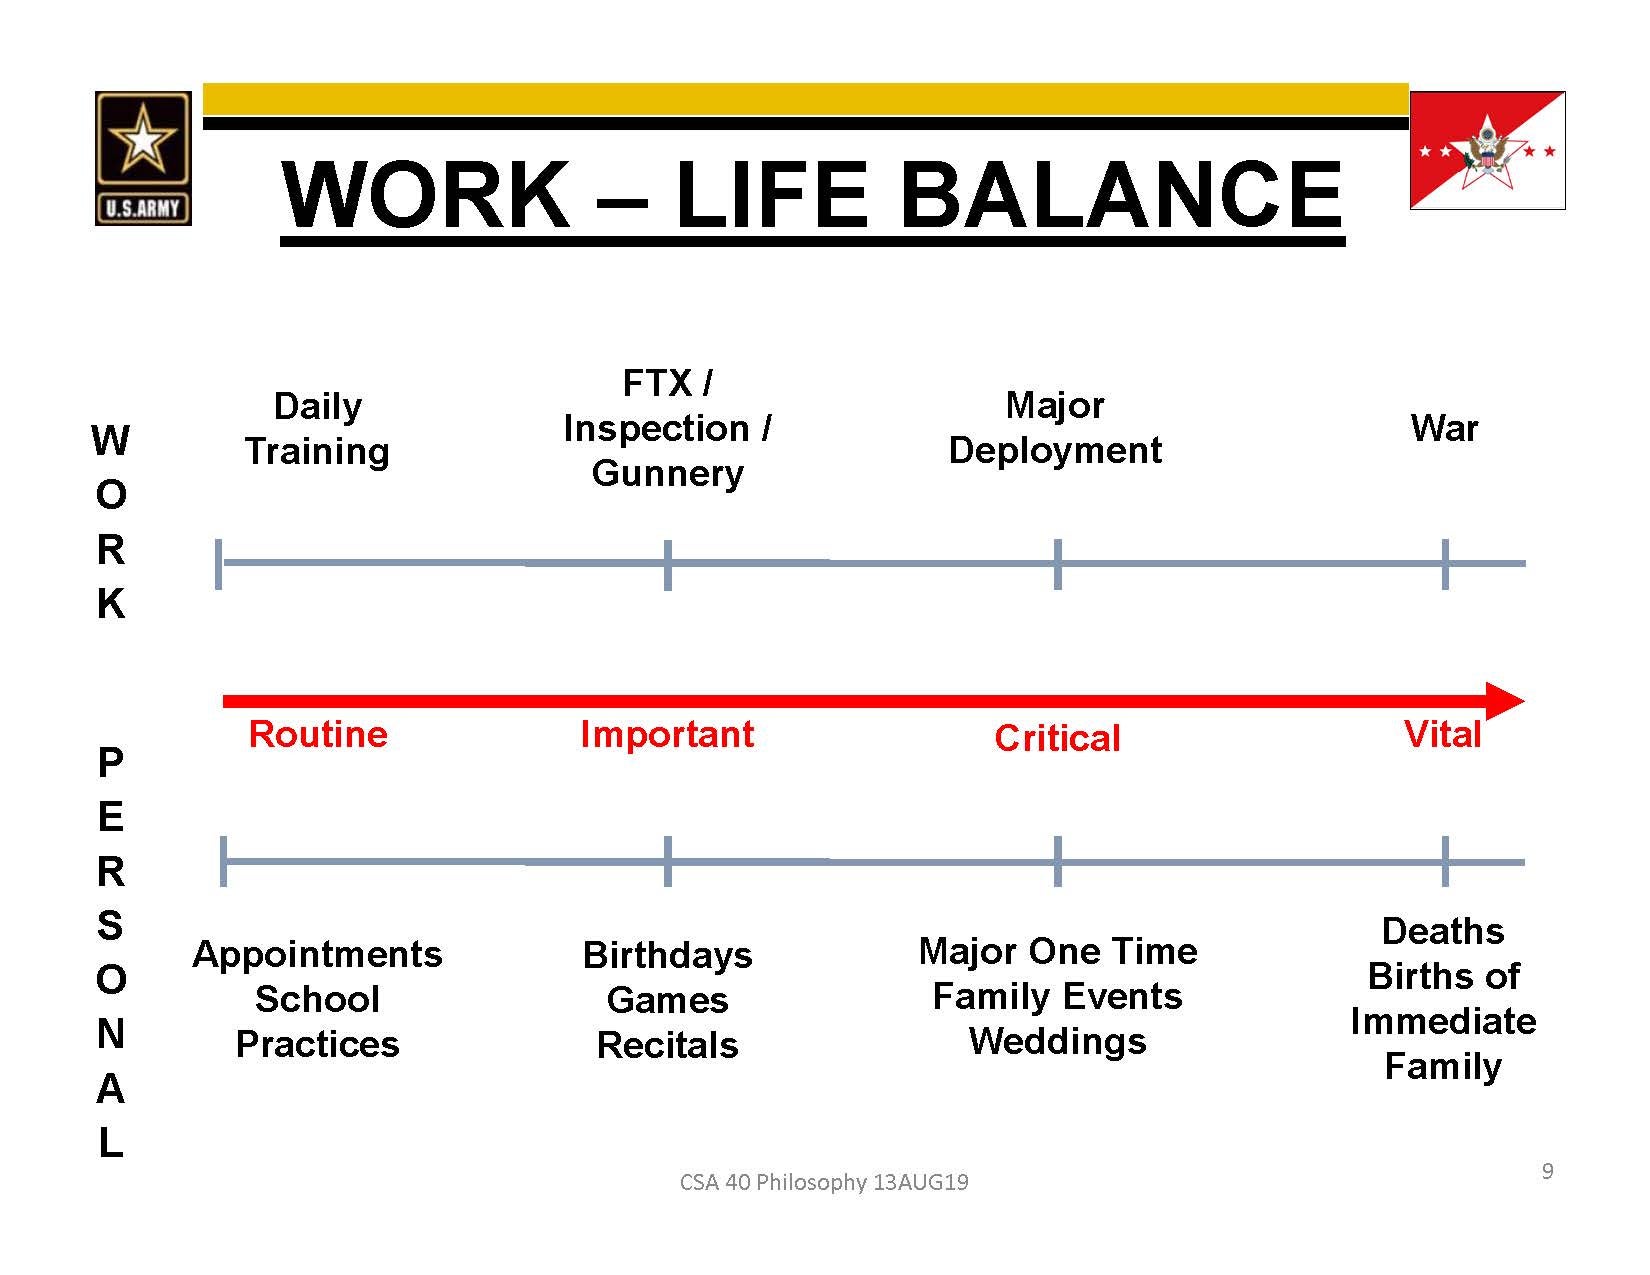 The Army Chief of Staff wants you to have work-life balance. Seriously